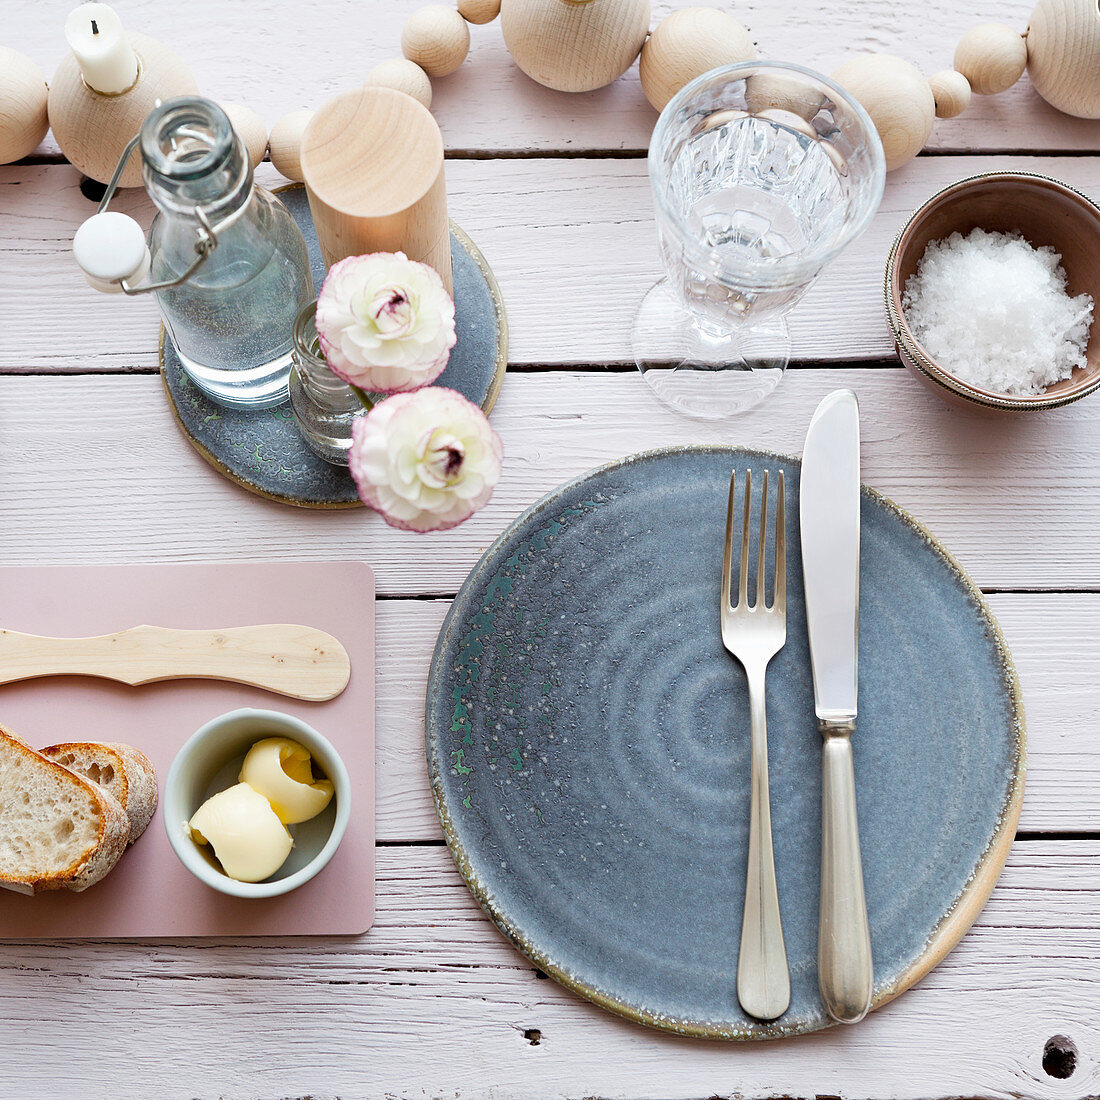 A place setting with a blue ceramic plate, butter, salt and bread